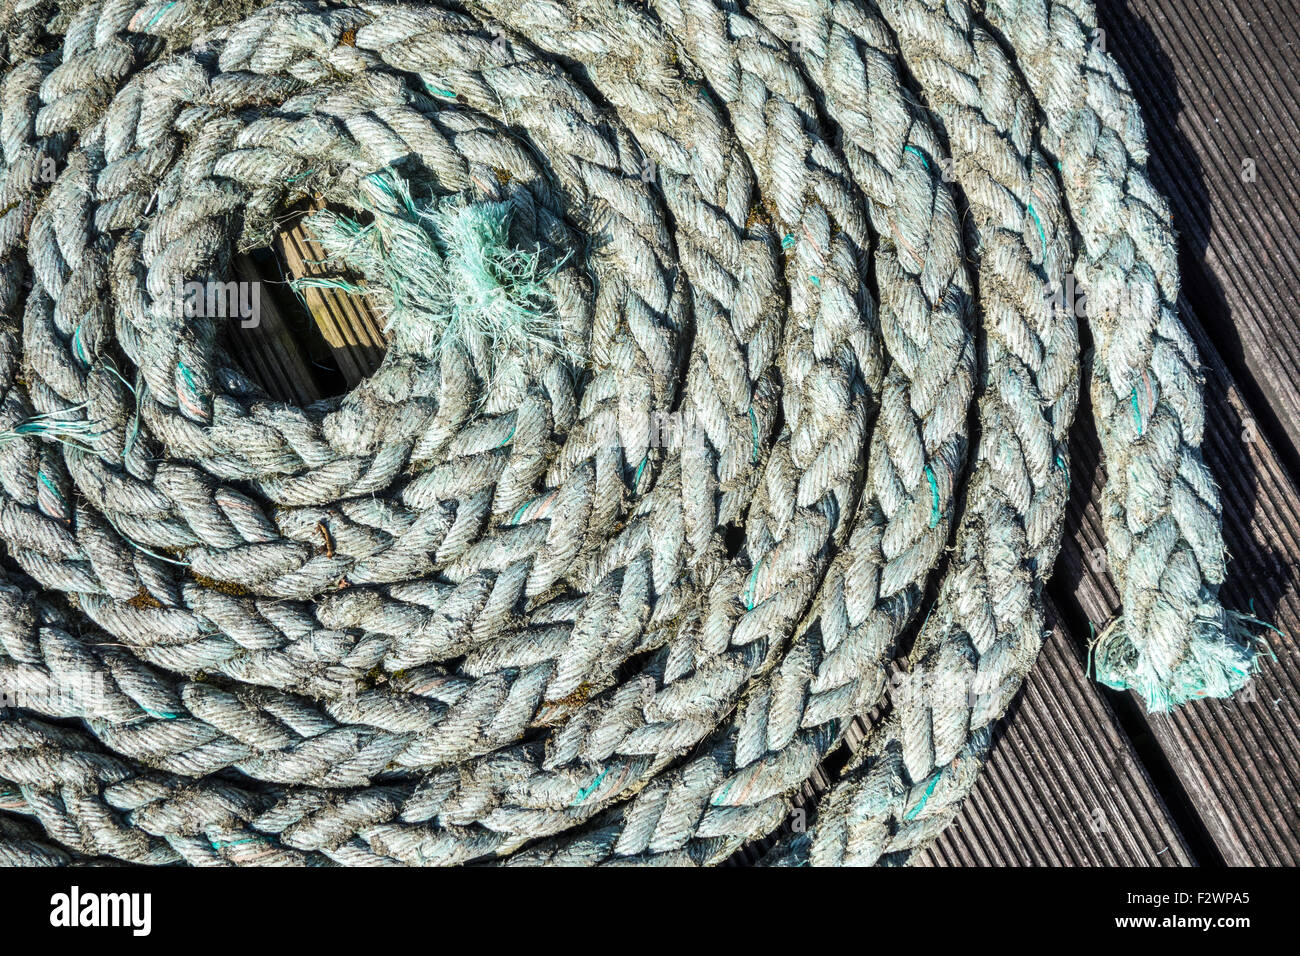 Close up of coiled braided rope / plaited hawser on deck of boat Stock Photo